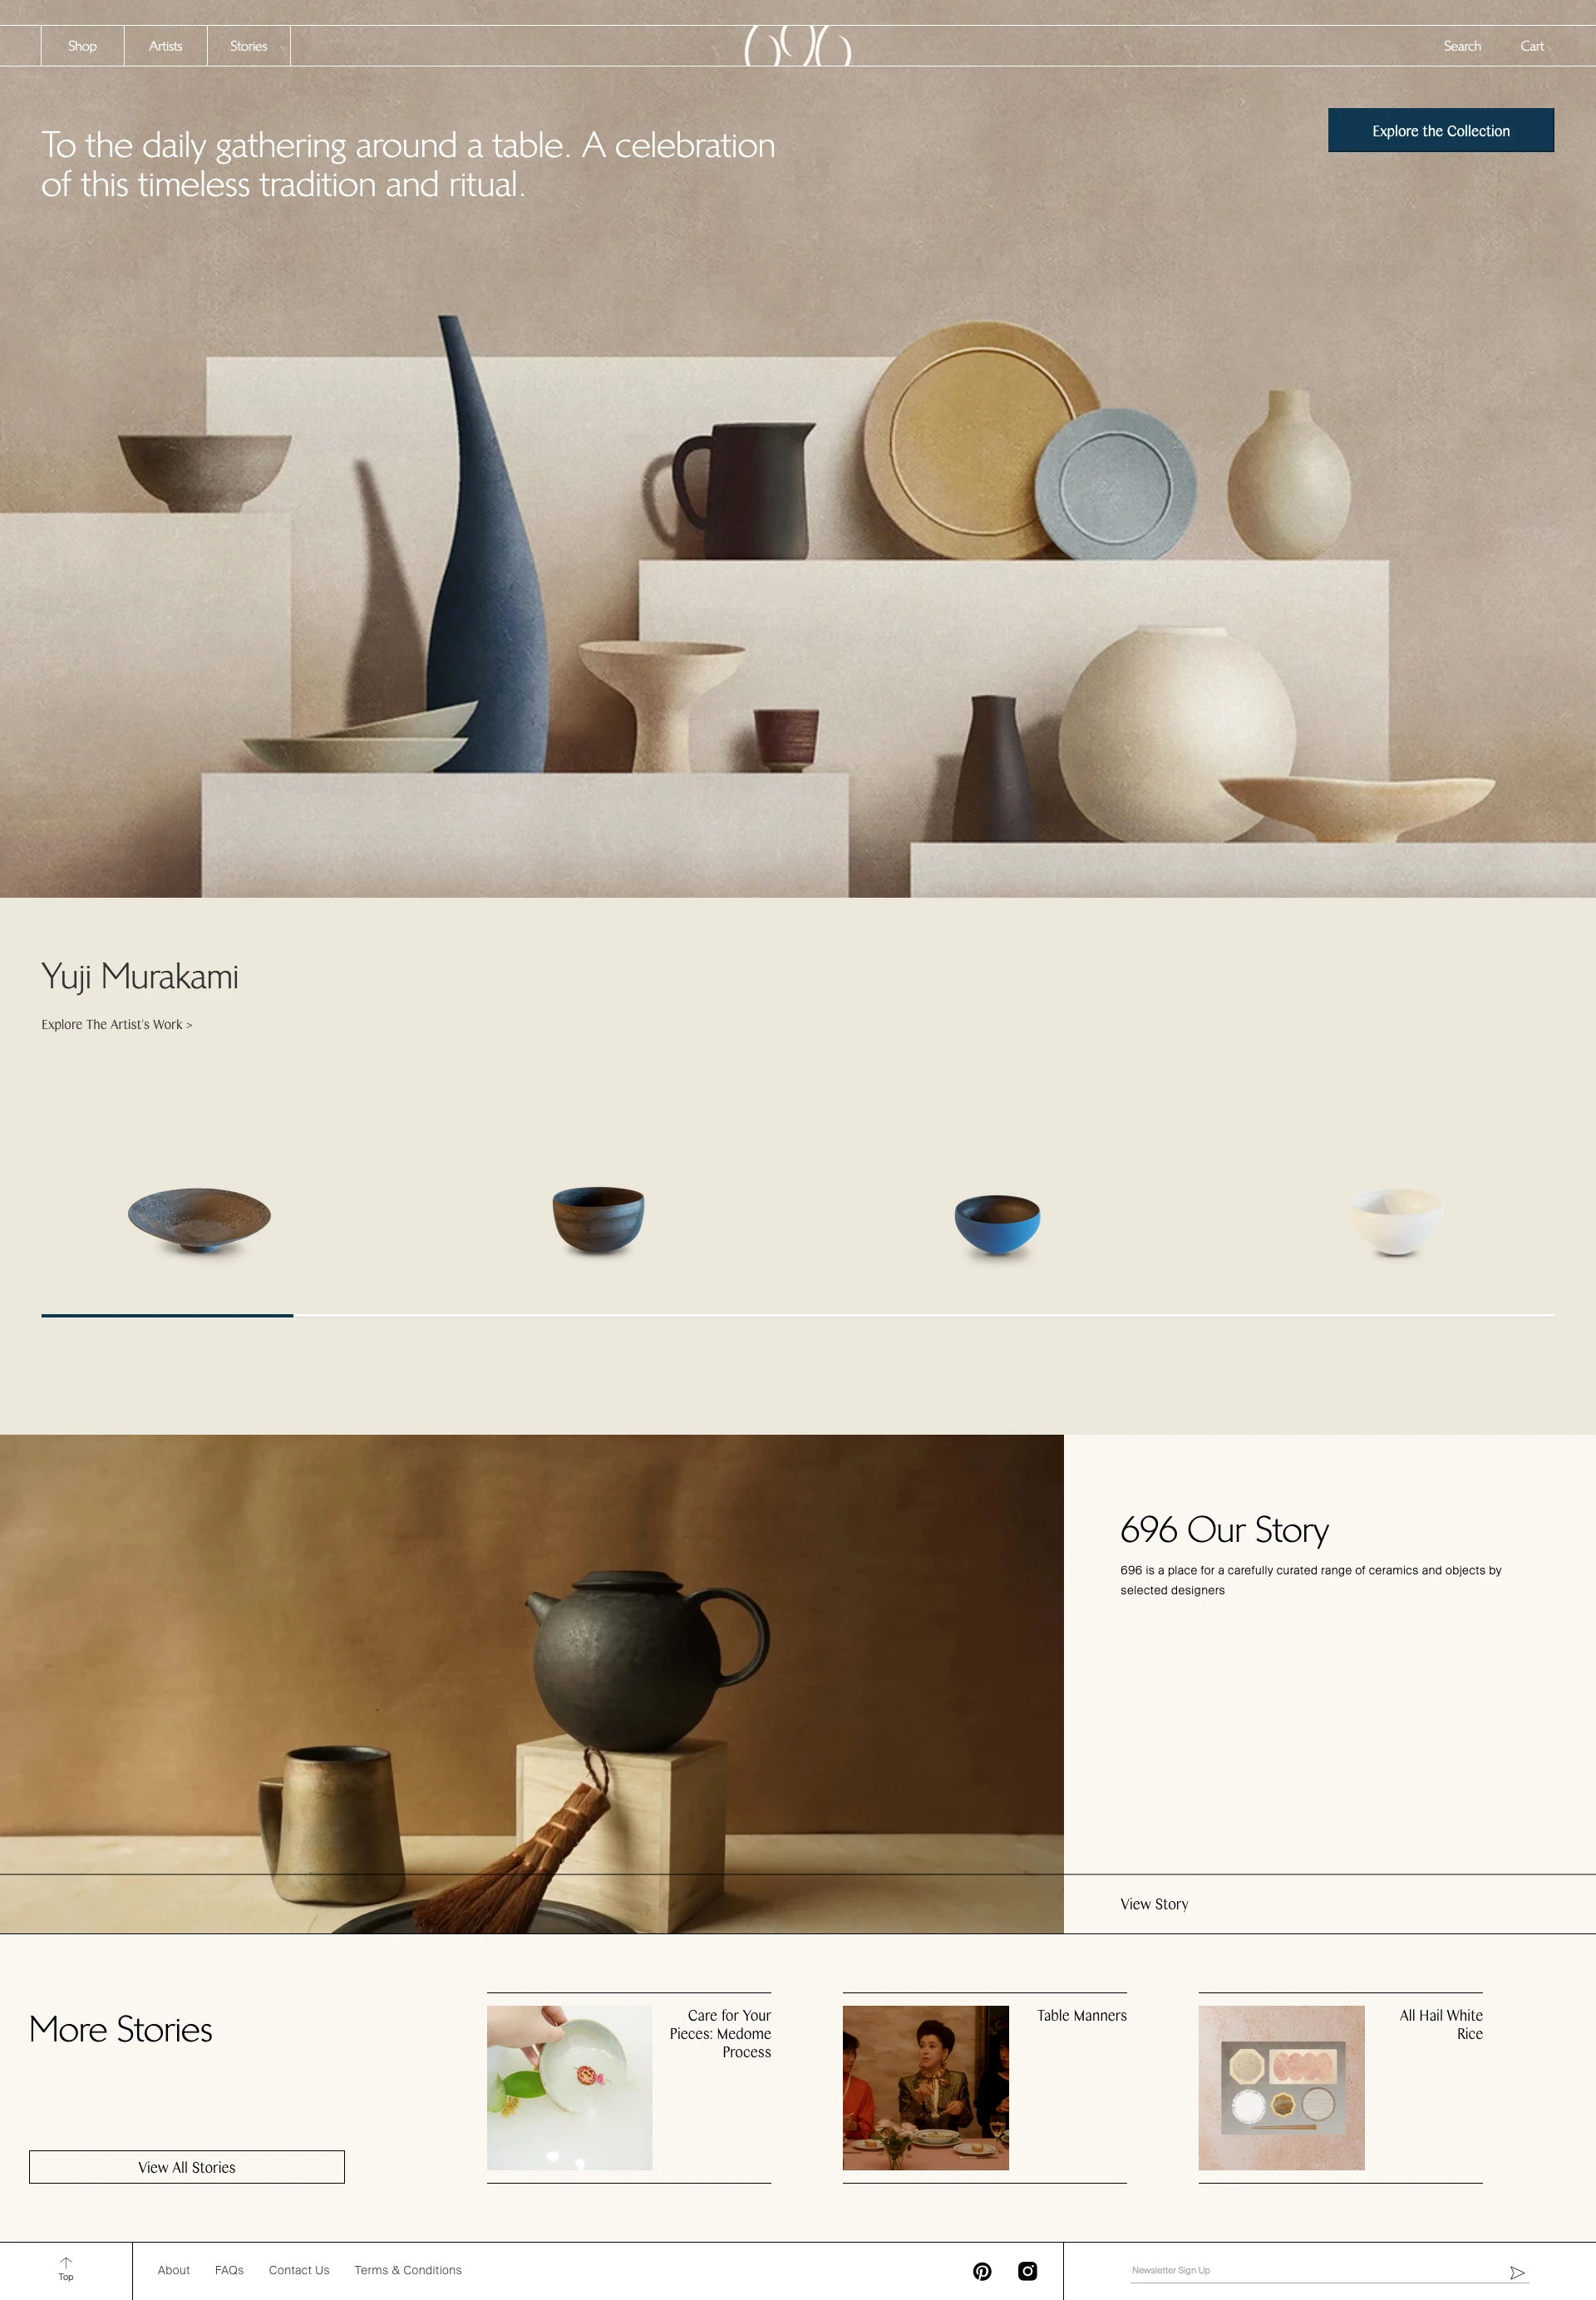 696 NYC Landing Page Example: 696 is a place for carefully curated ceramics, vessels, and objects by selected Japanese craftsmen and designers. We offer handcrafted, fine quality and material-first objects, and we’re proud in our effort to lead the way in offering small-scale sustainably produced goods that celebrate tradition.